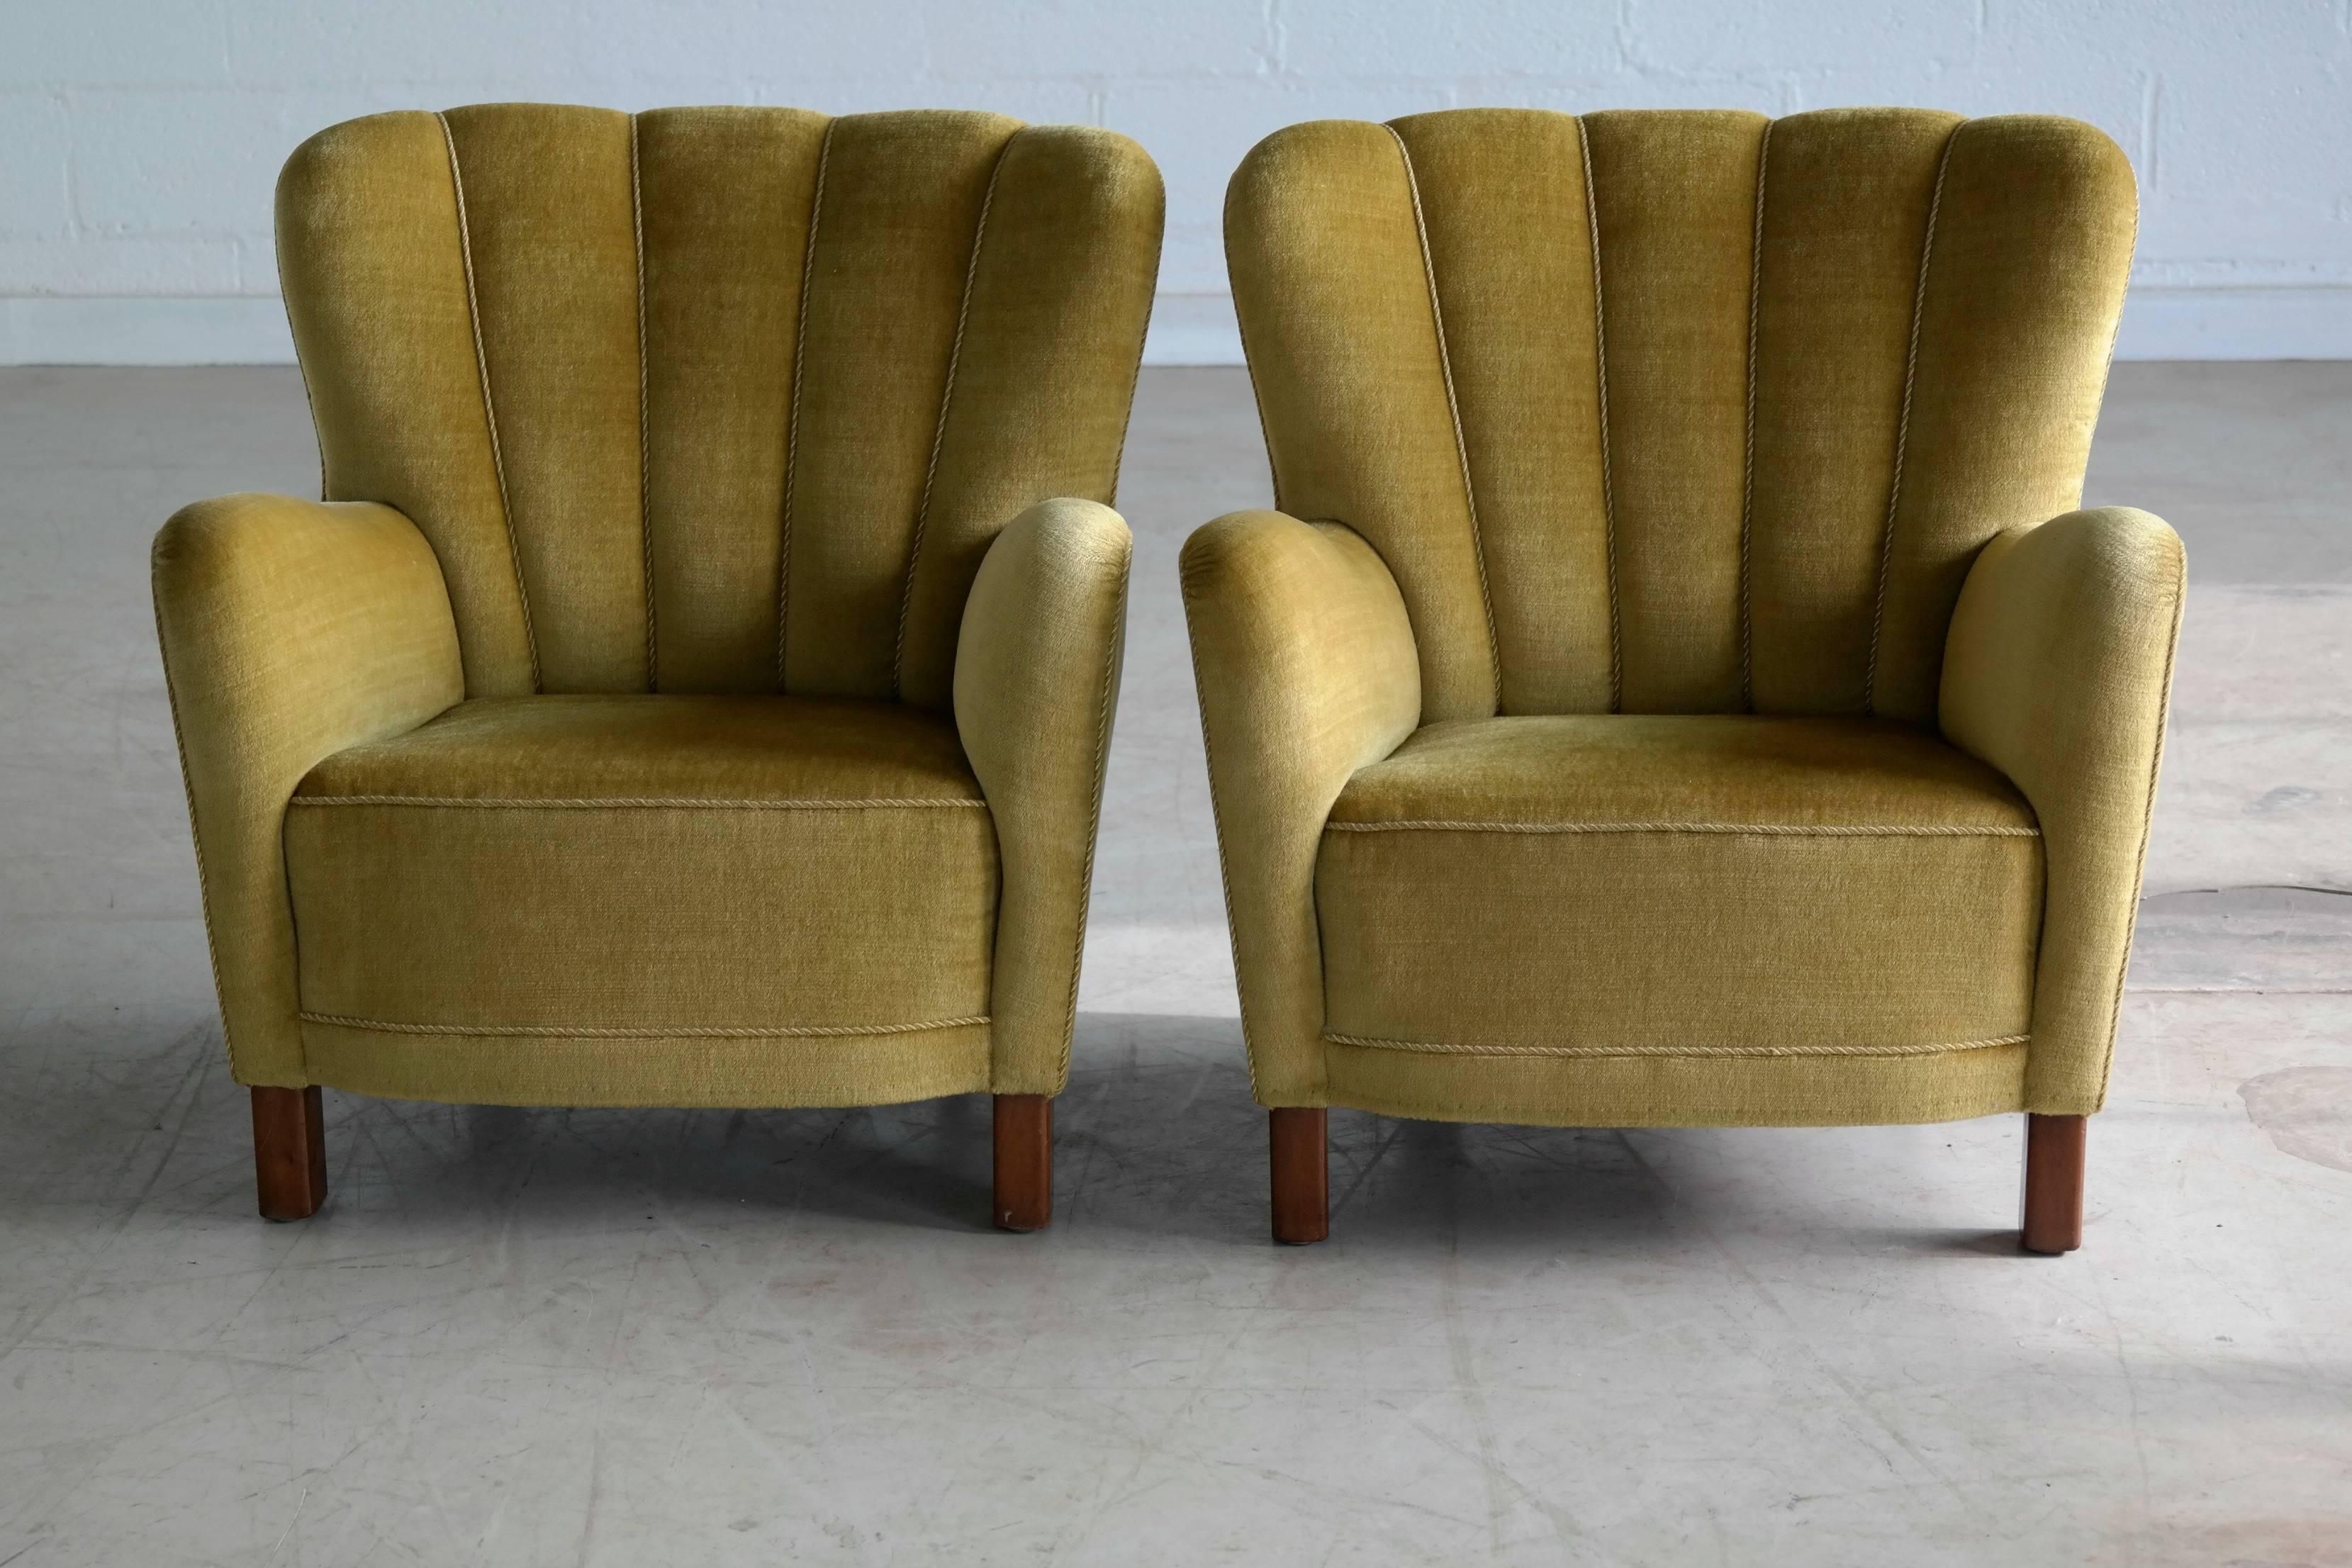 This rare set of Danish armchairs retain the iconic style of the large armchairs of the era but are smaller in scale and thus very suitable for today's urban Dwellings. Very coveted 'variant" as Fritz Hansen calls it and rarely found. Seat and